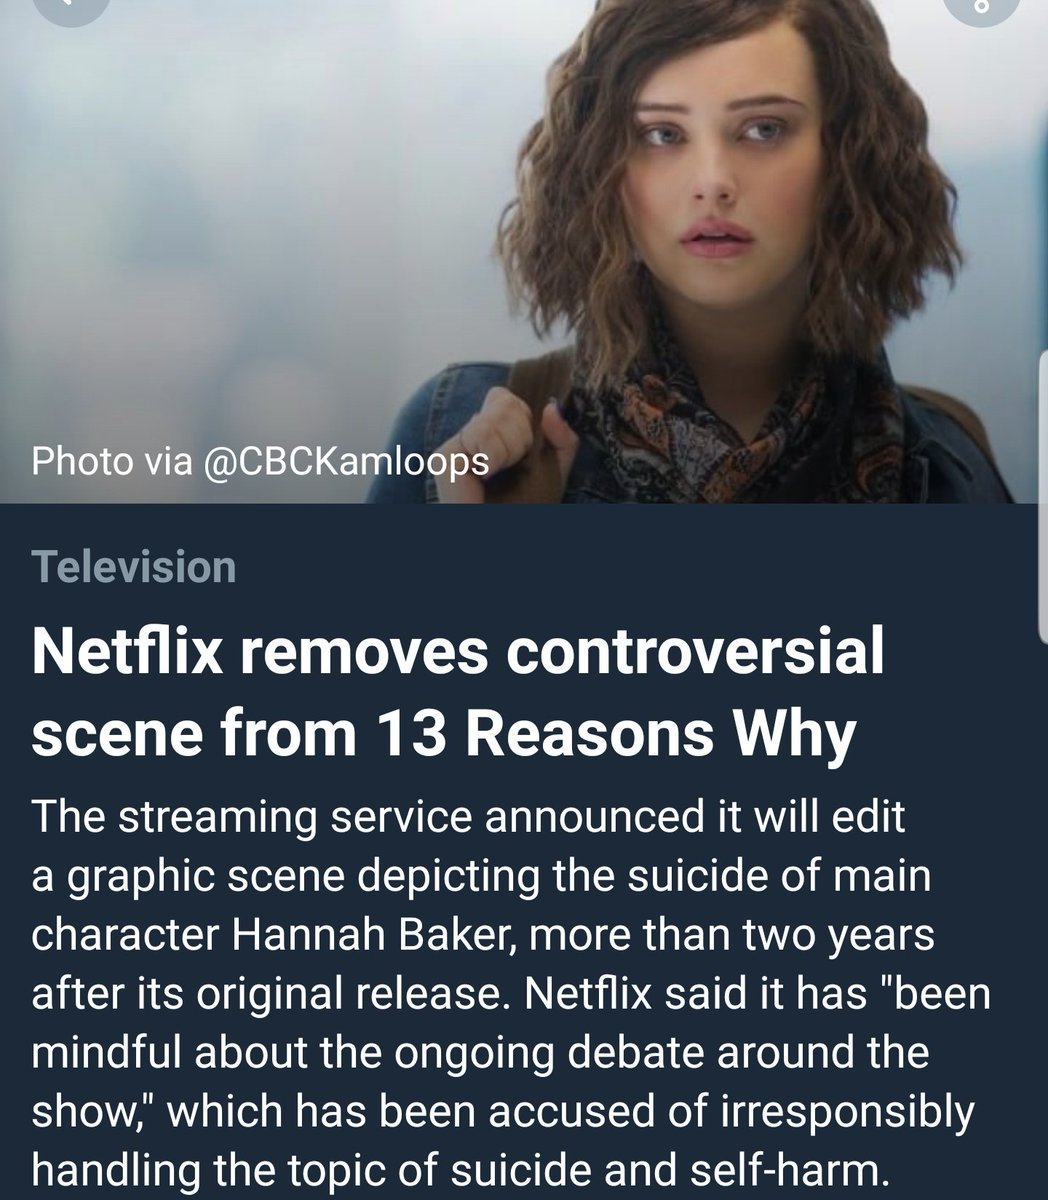 Netflix cuts out '13 Reasons Why' controversial suicide scene amid pressure